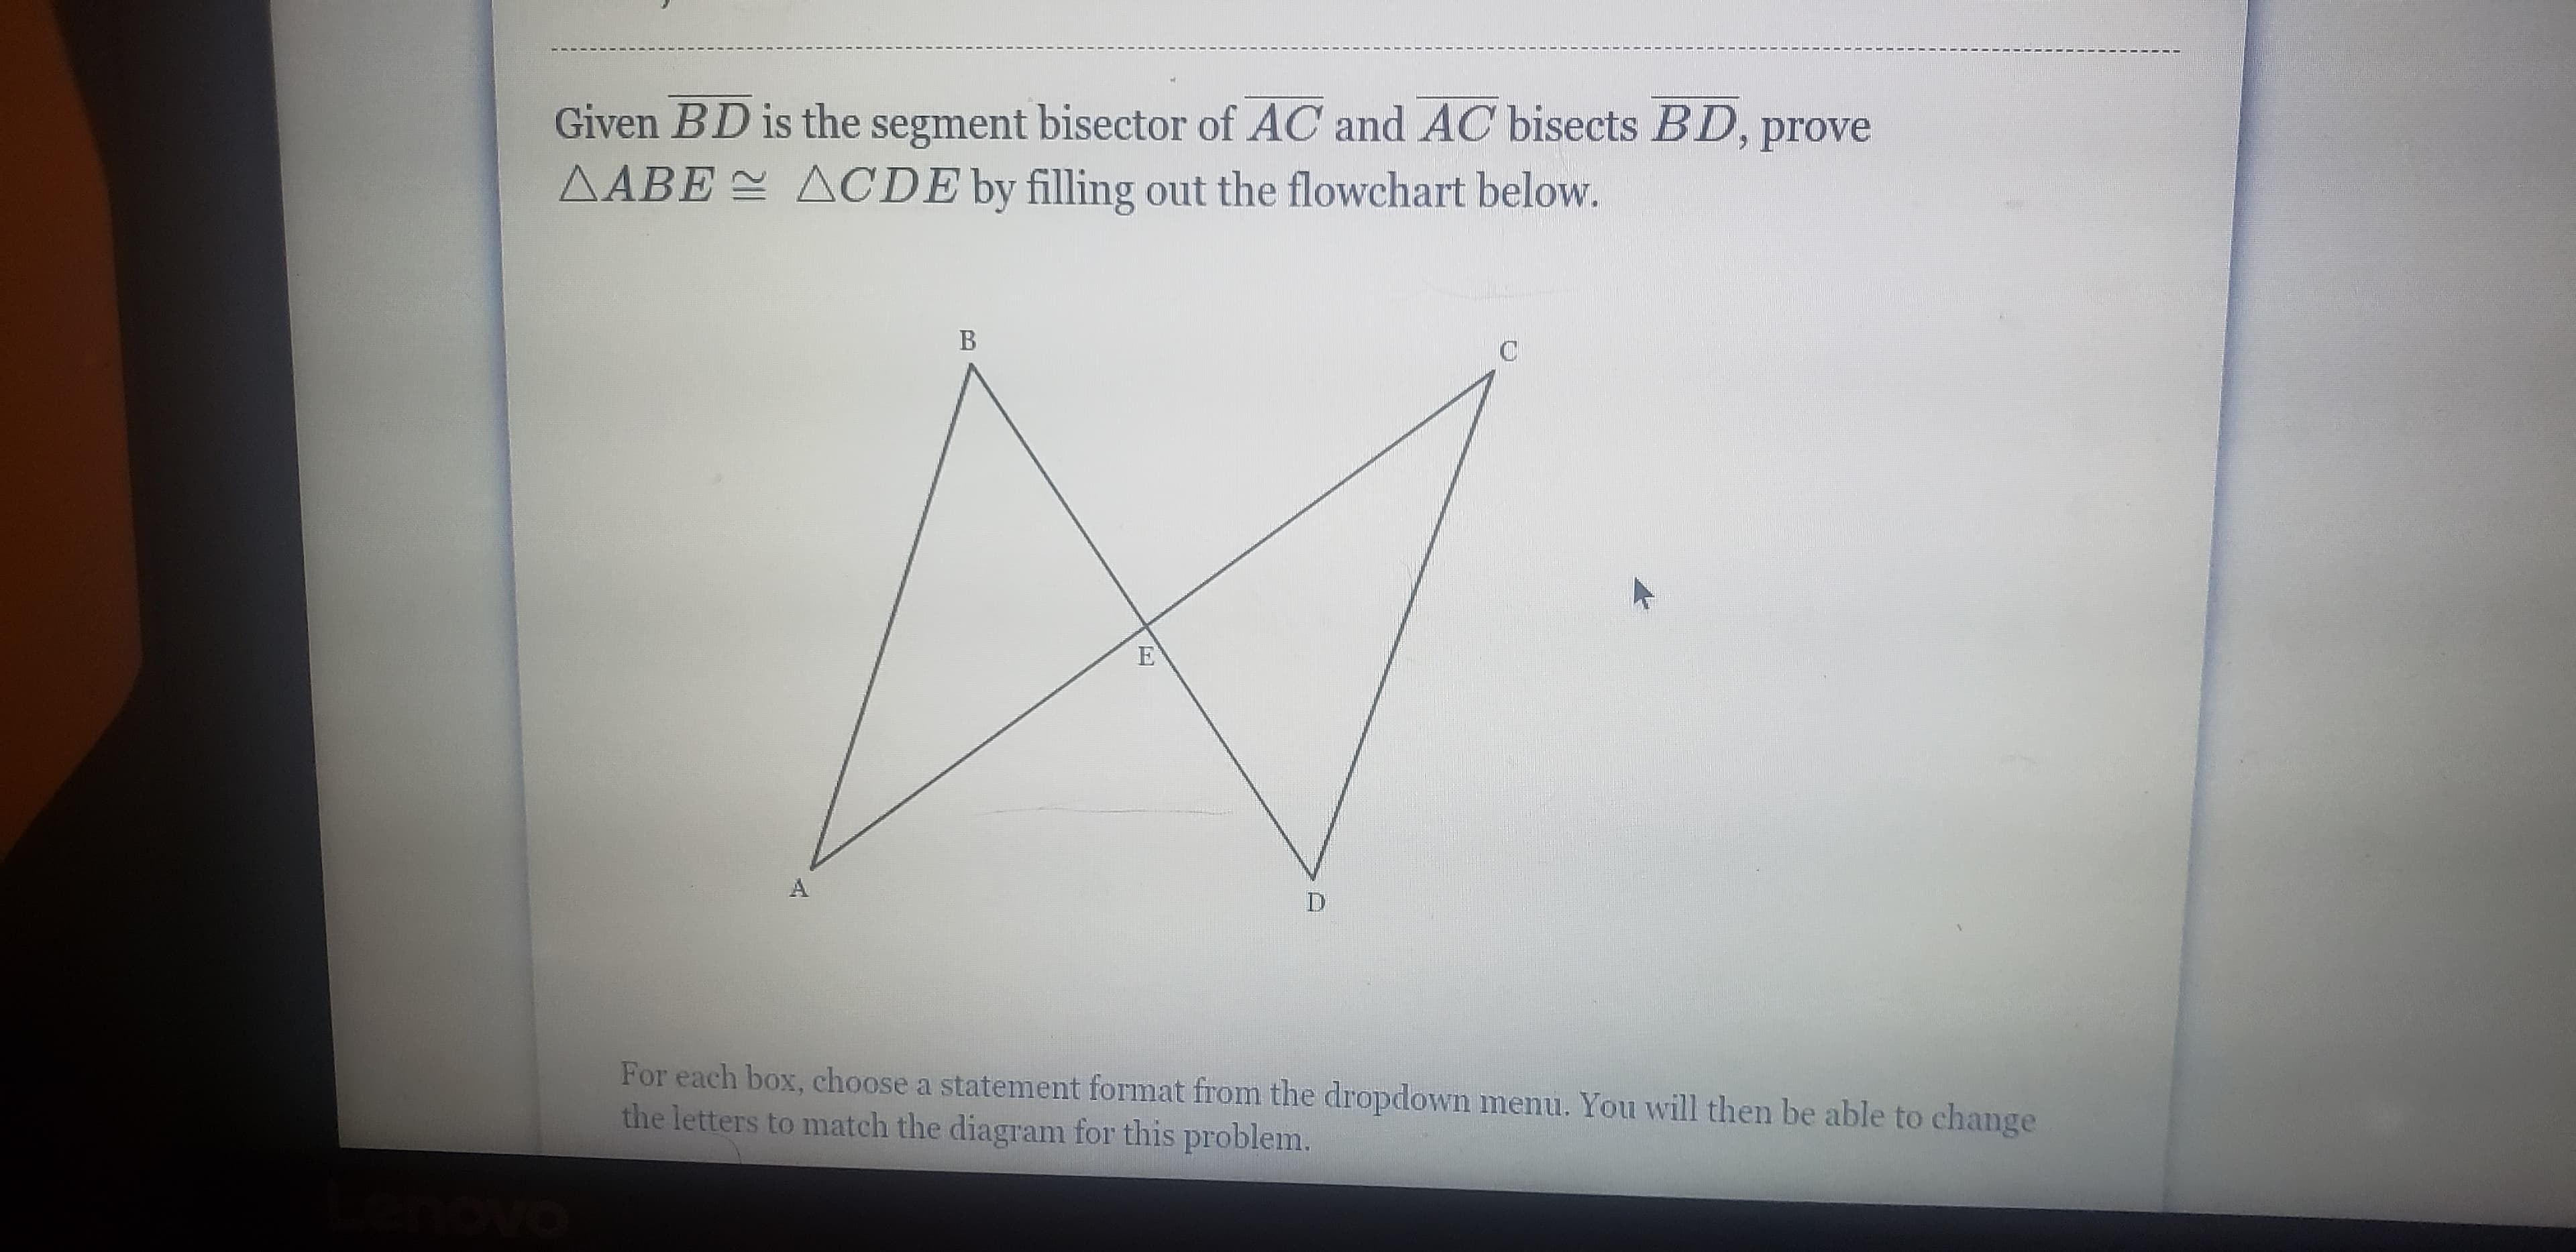 Given BD is the segment bisector of AC and AC bisects BD, prove
AABE ACDE by filling out the flowchart below.
A.
D.
For each box, choose a statement format from the dropdown menu. You will then be able to change
the letters to match the diagram for this problem.
